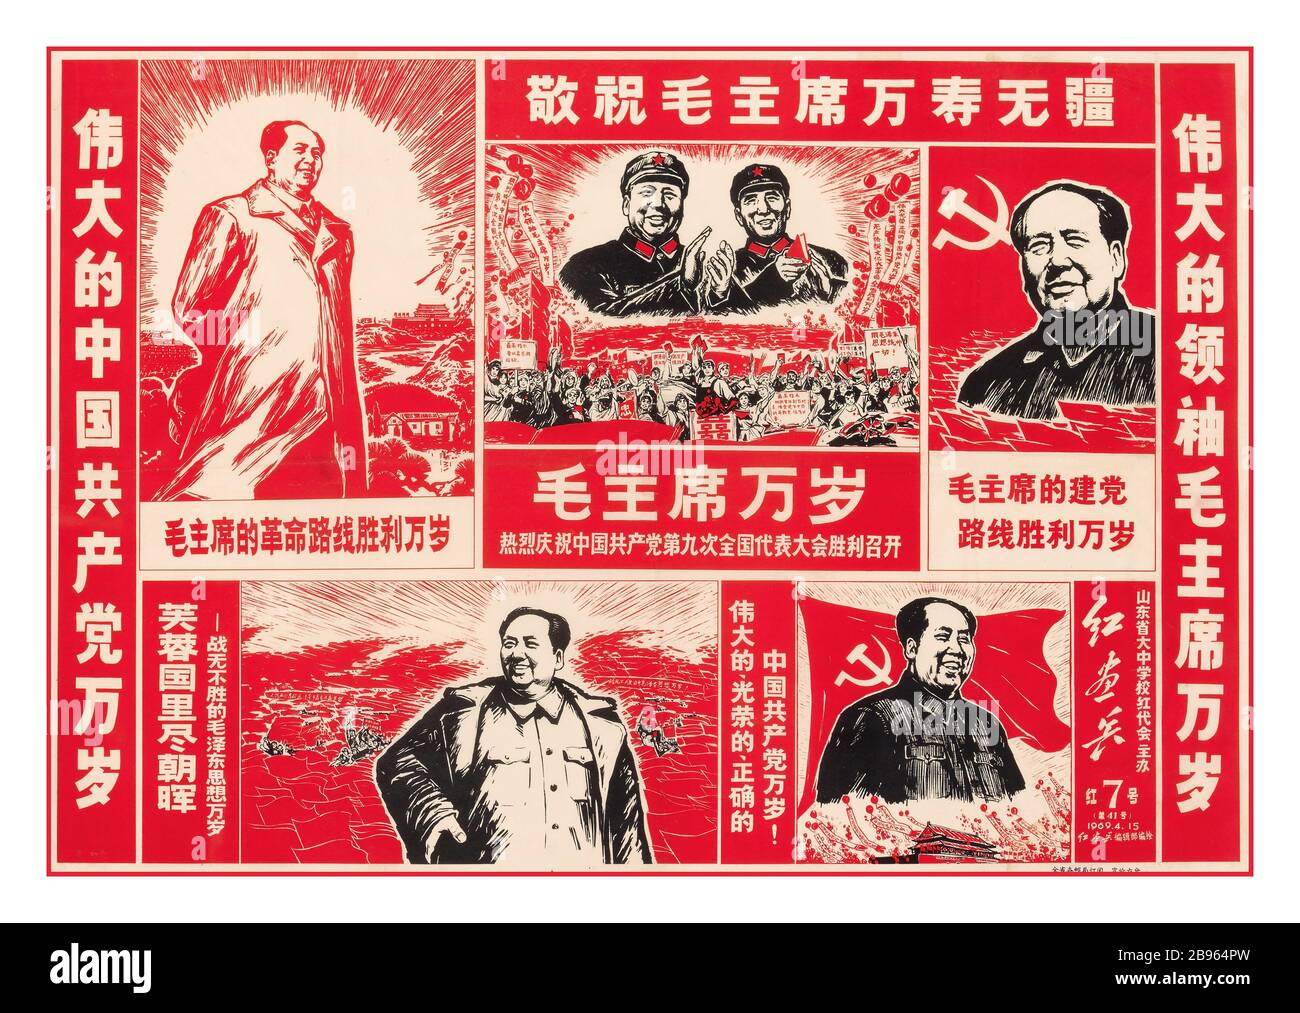 CHAIRMAN MAO Vintage 1960s Chinese Propaganda Poster featuring Chairman Mao in various Guises as Leader including with the Soviet Union Hammer and Sickle Flag Stockfoto